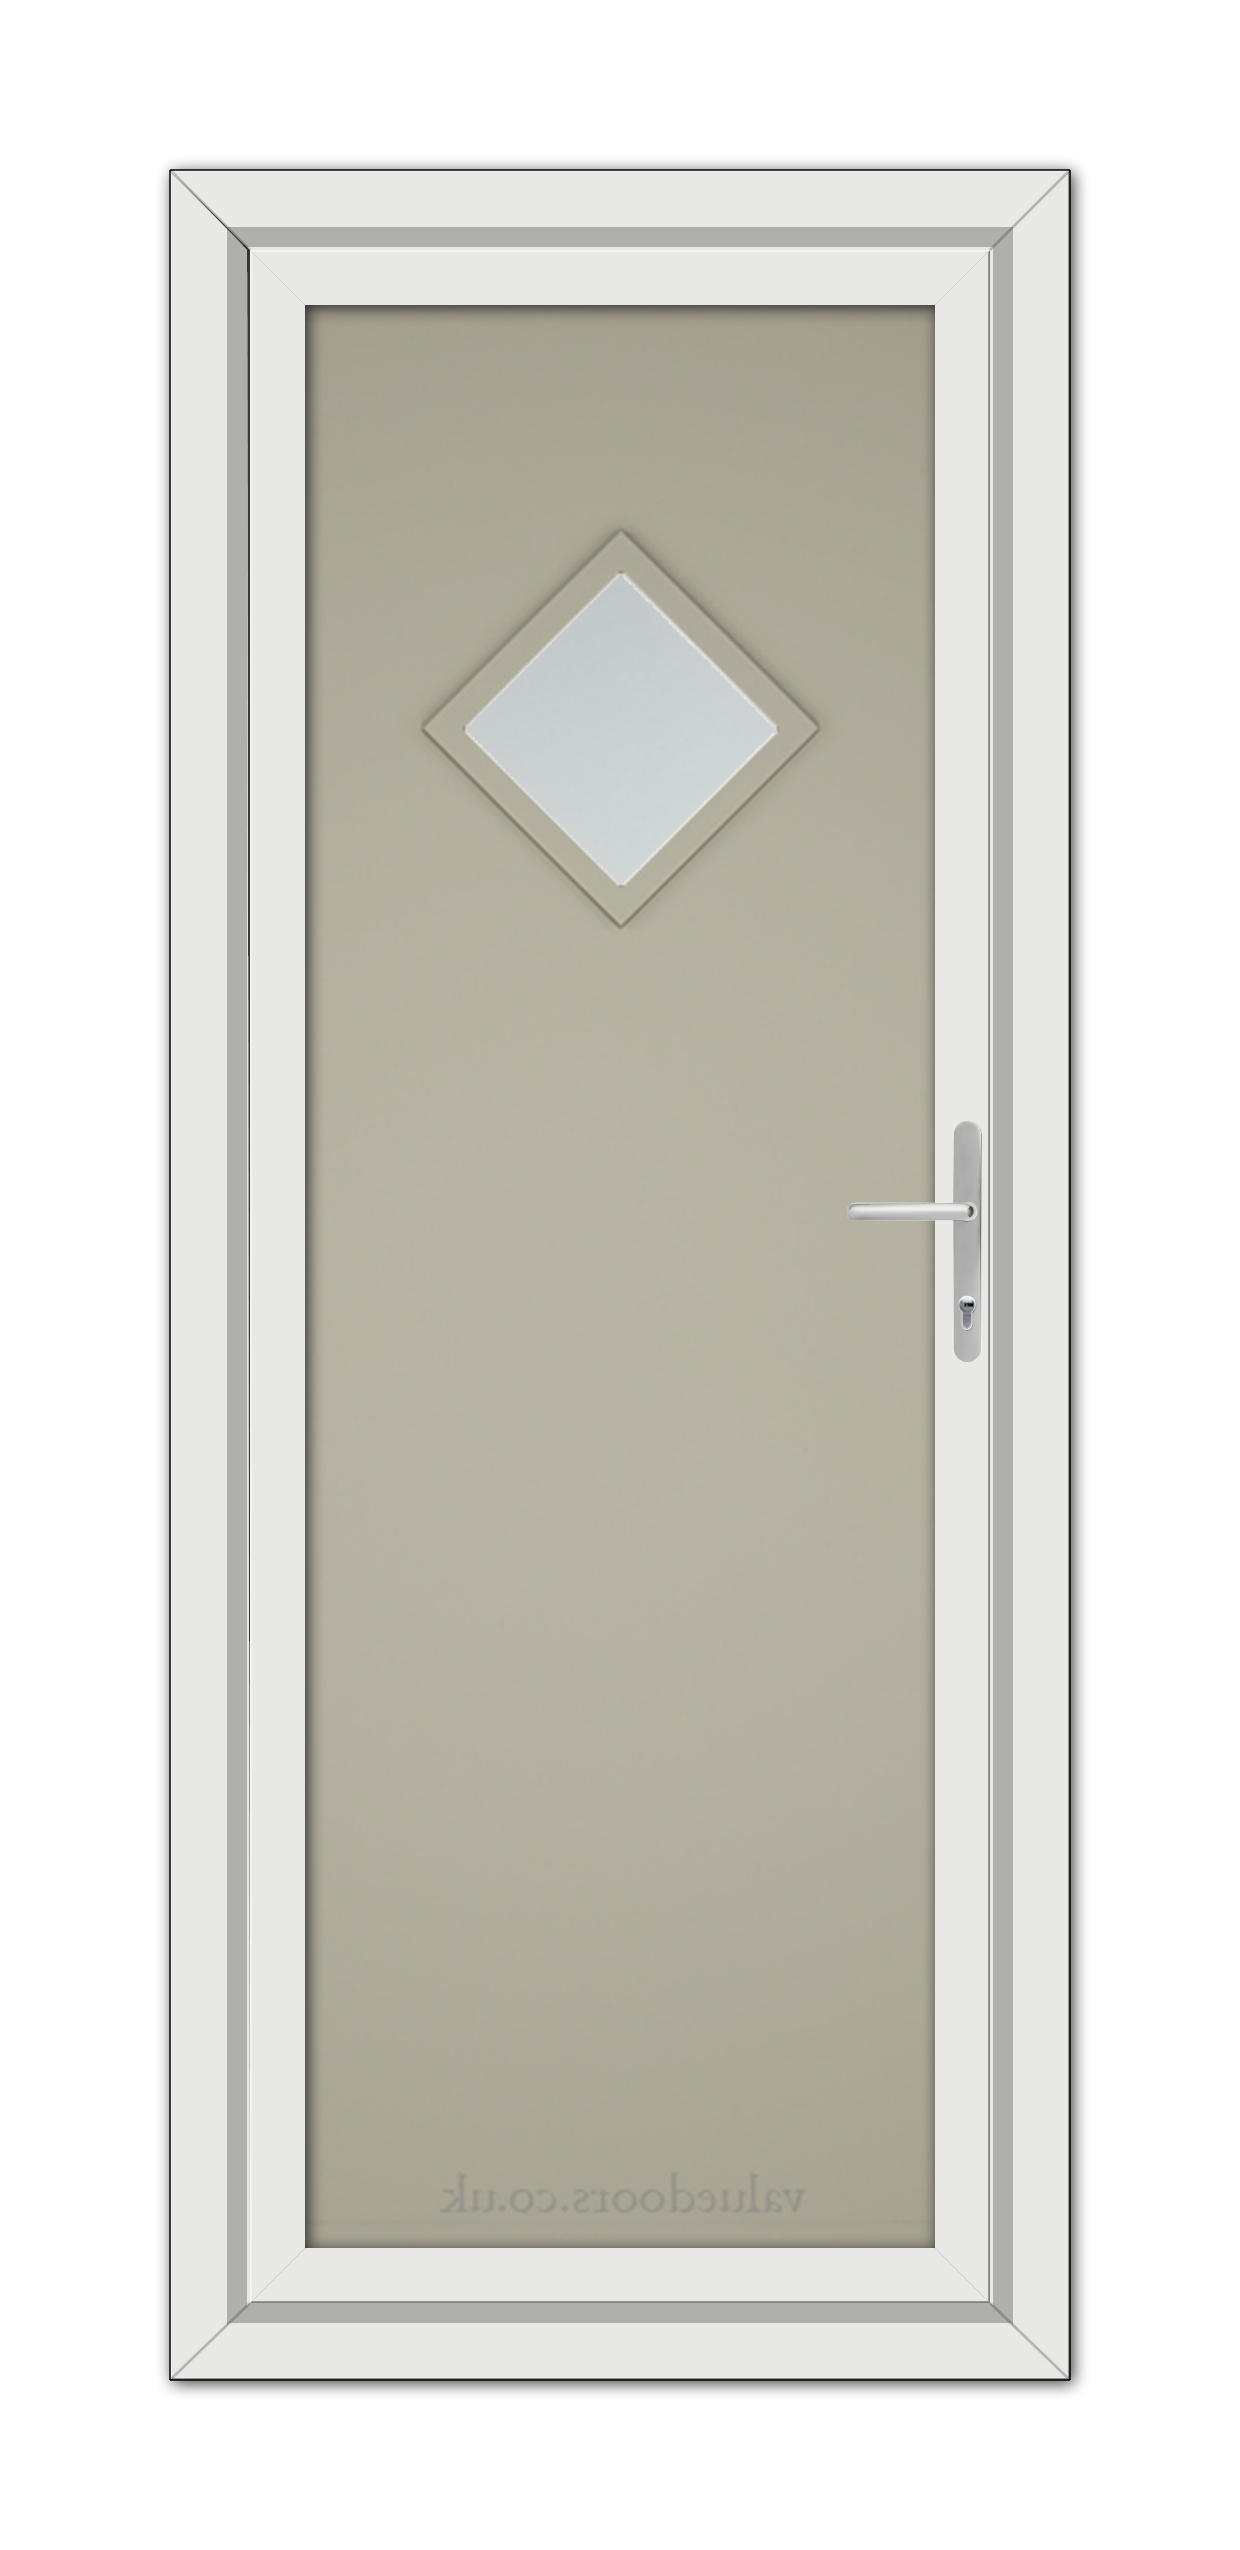 Pebble Grey Modern 5131 uPVC Door with a diamond-shaped window and a metallic handle, set against a plain background.